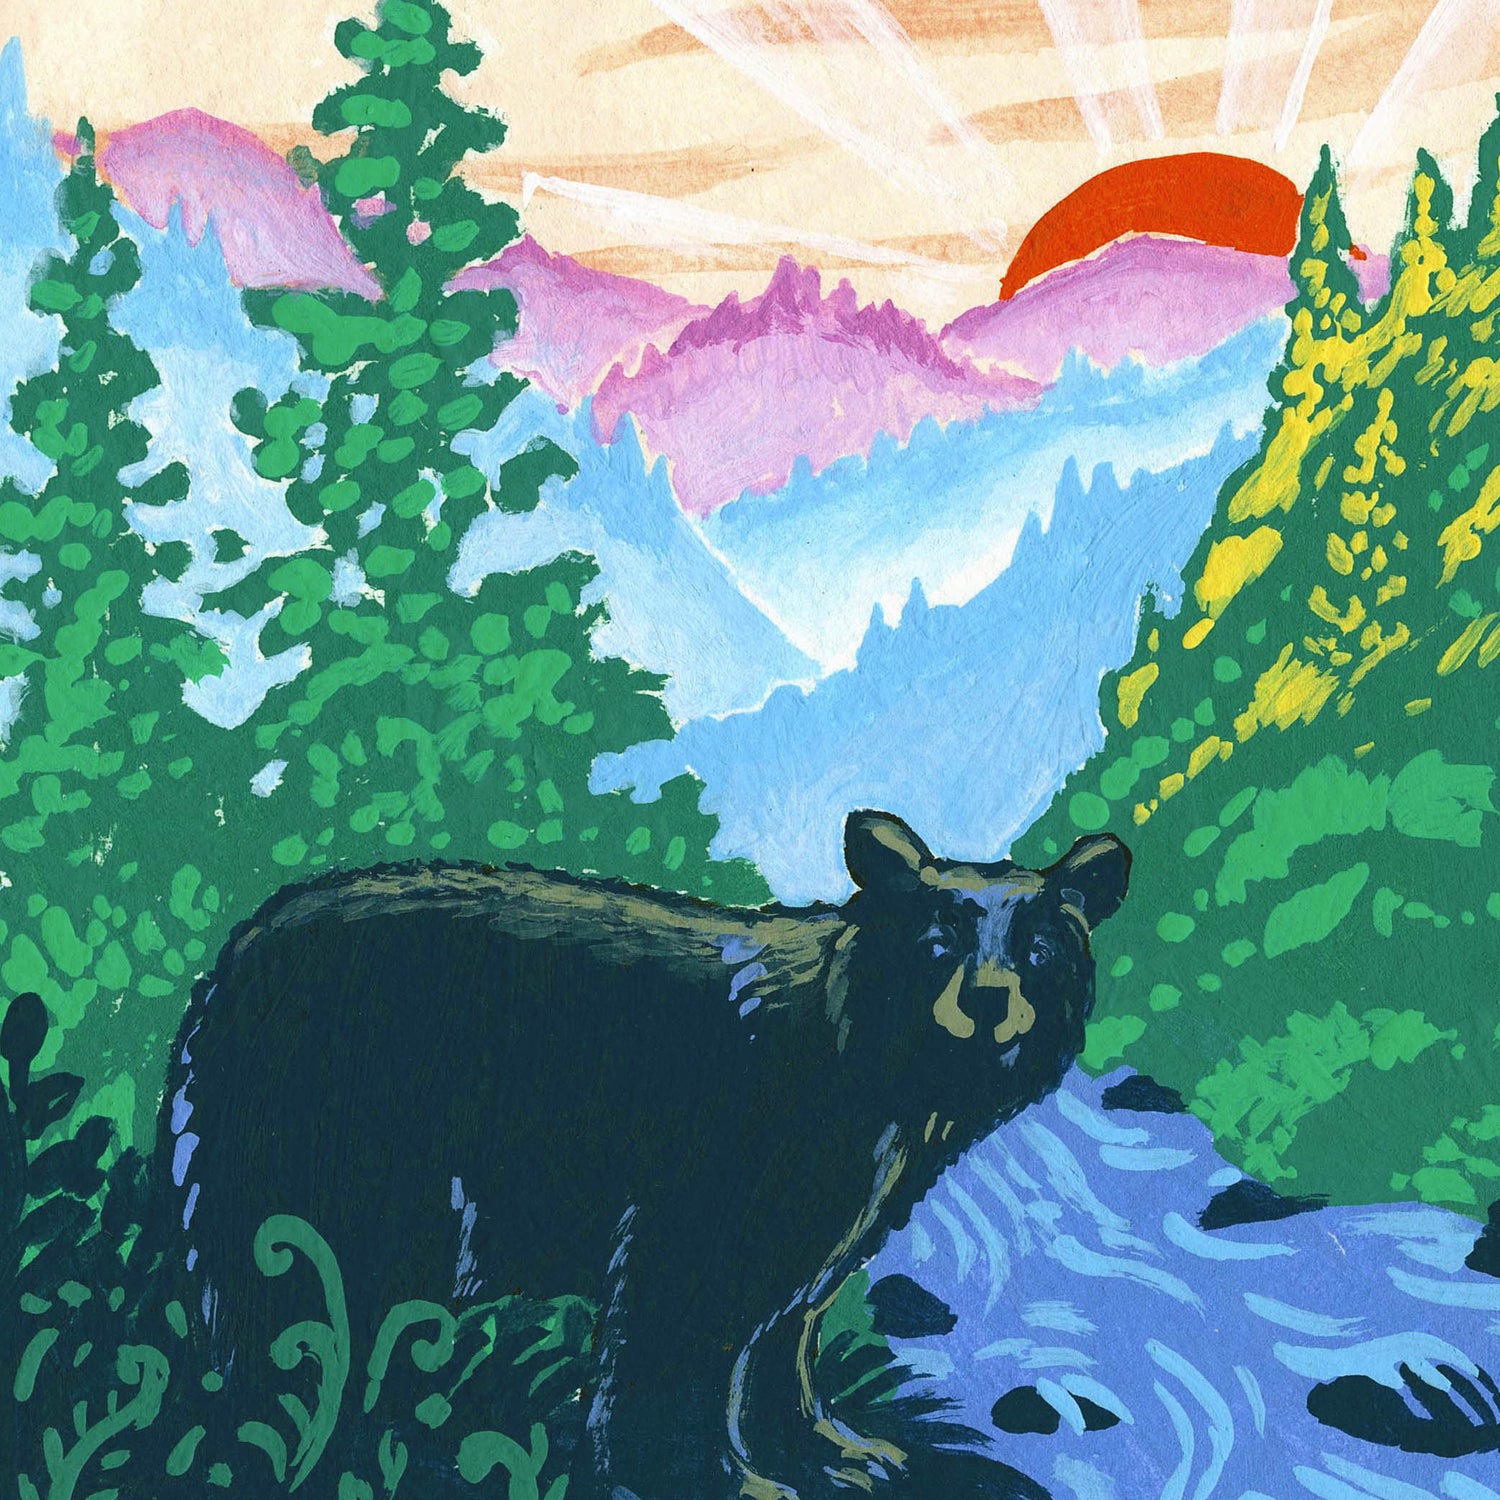 Great Smoky Mountains National Park art detail with black bear, sunset, mountains, and forest; trendy illustration by Angela Staehling